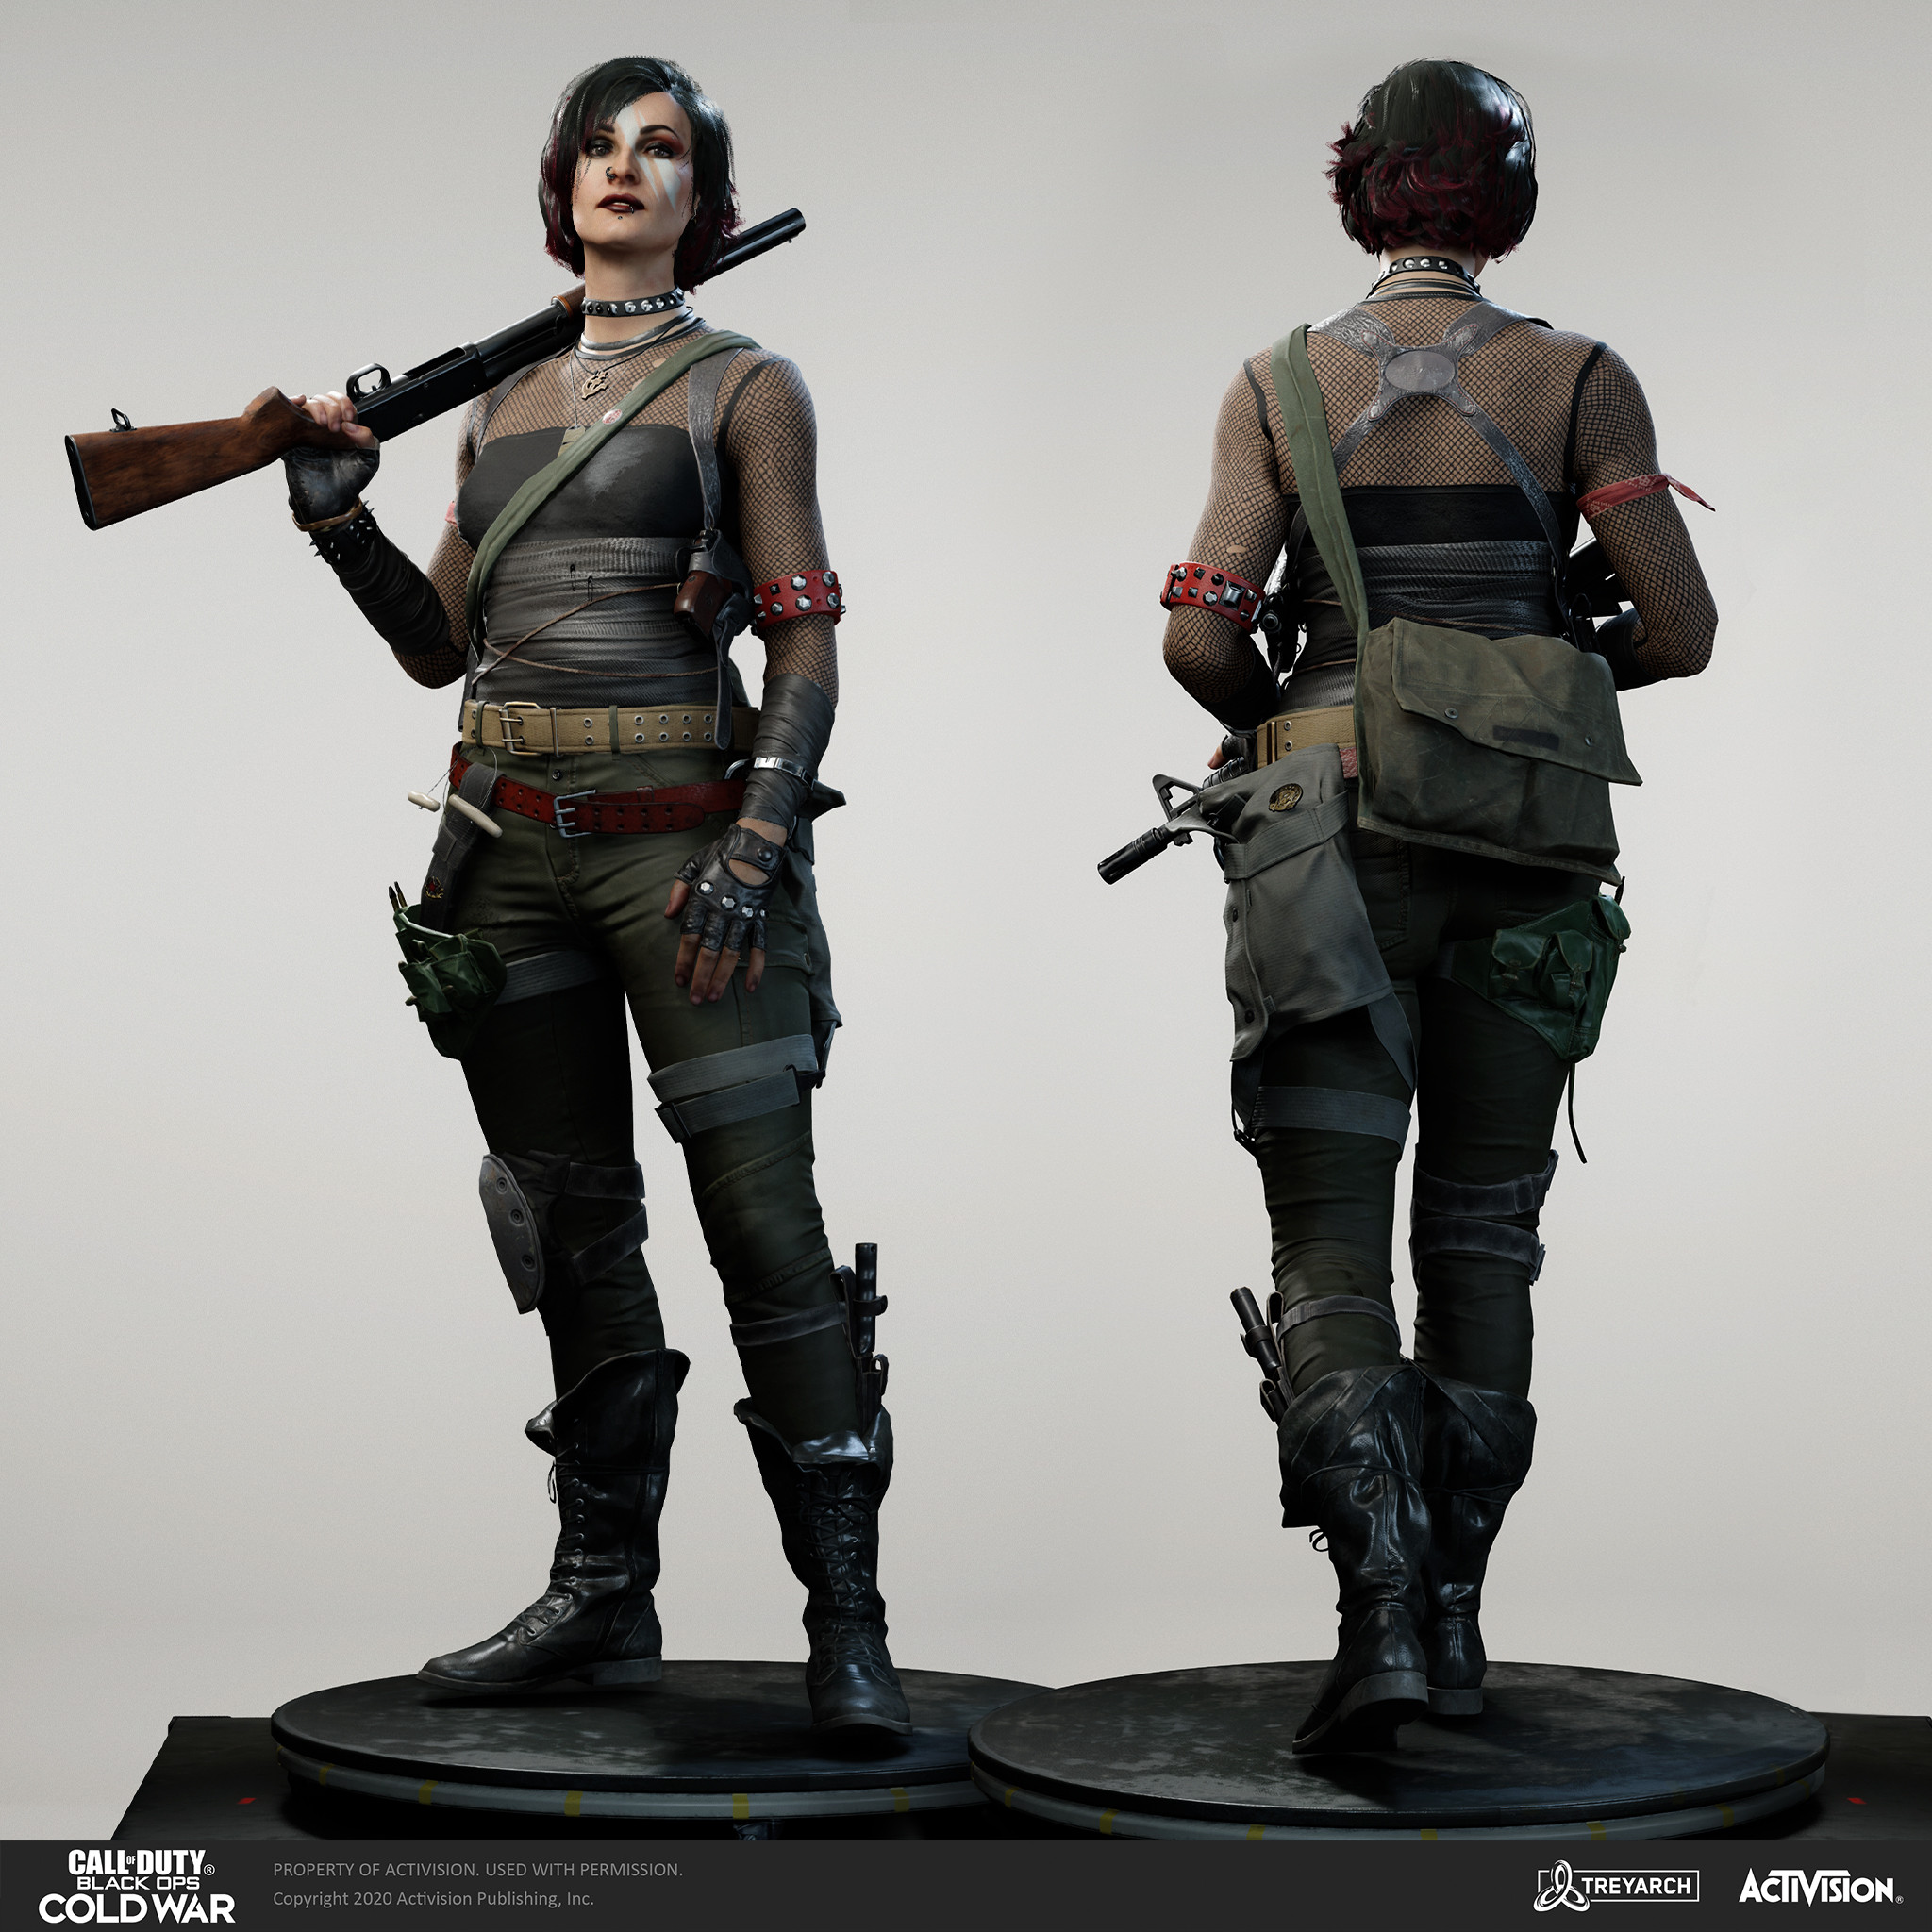 Yirina Portnova - Tactical Goth. I was responsible for the design, game mesh assembly, and textures/materials. Individual models/bakes used on the character were created by the Treyarch, SHG, Raven, and OS teams. Head and hair model by Wren Cromwell.